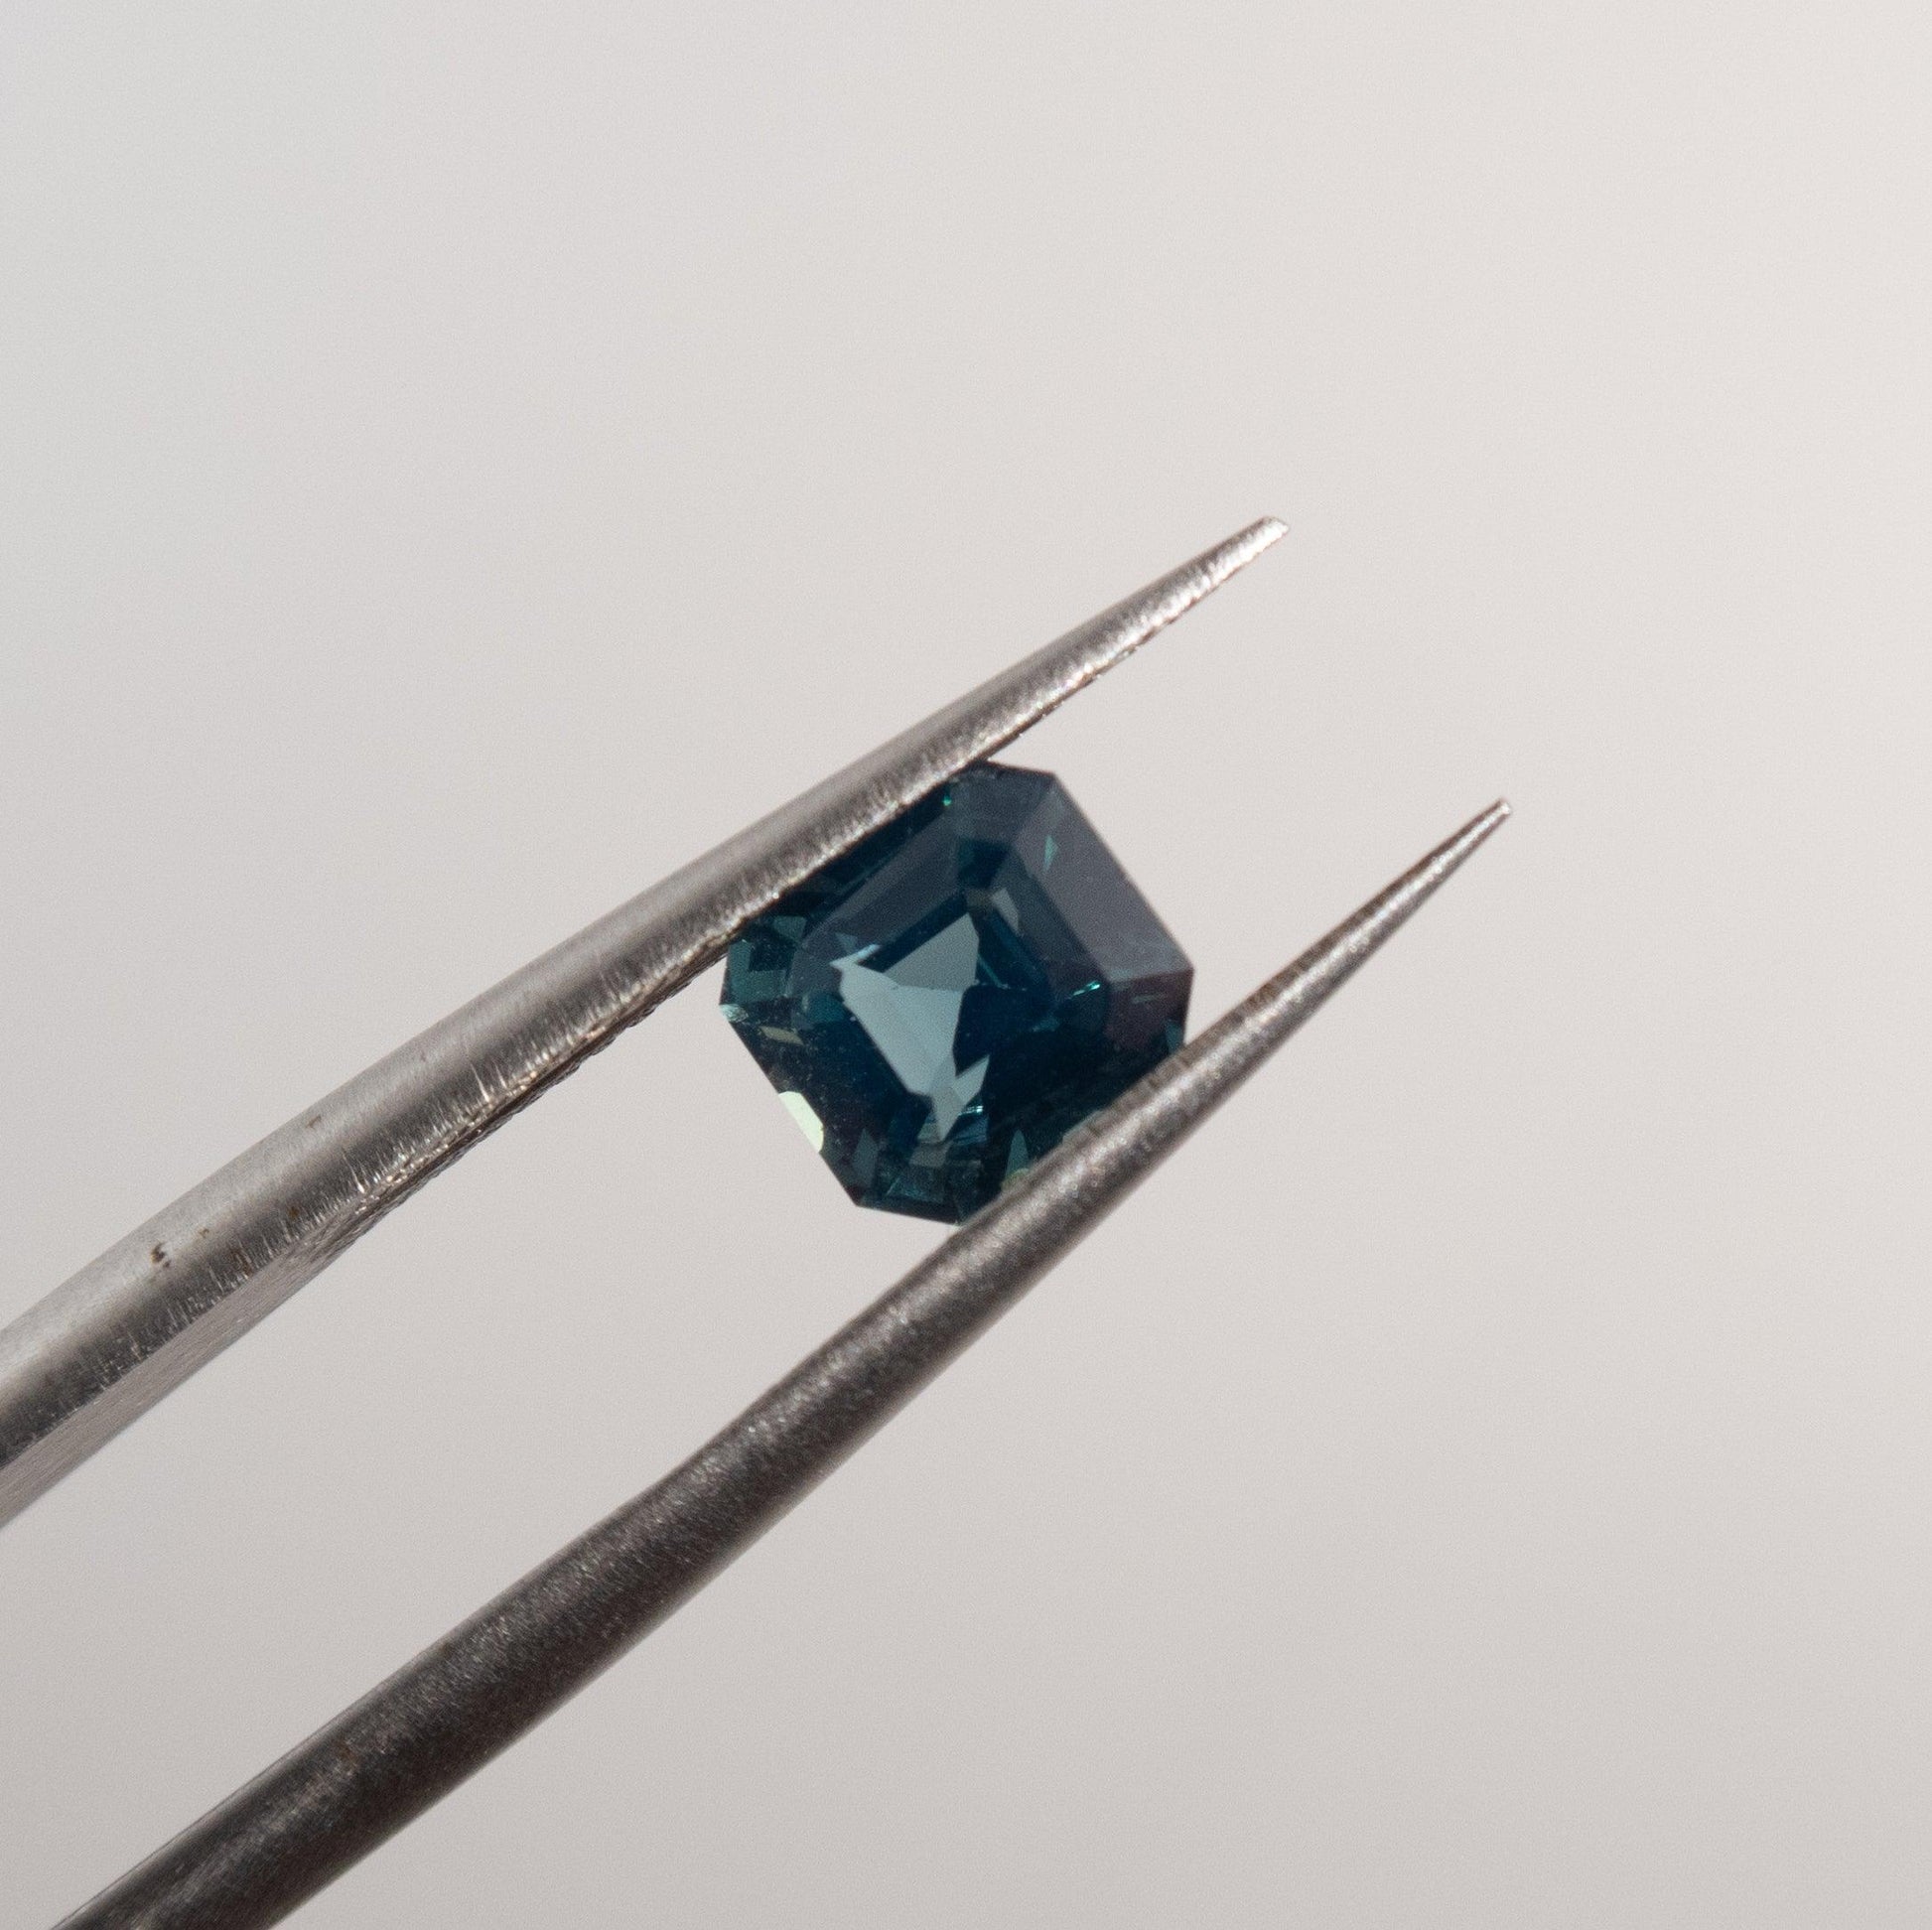 Teal Sapphire Natural No Heat 1.16ct